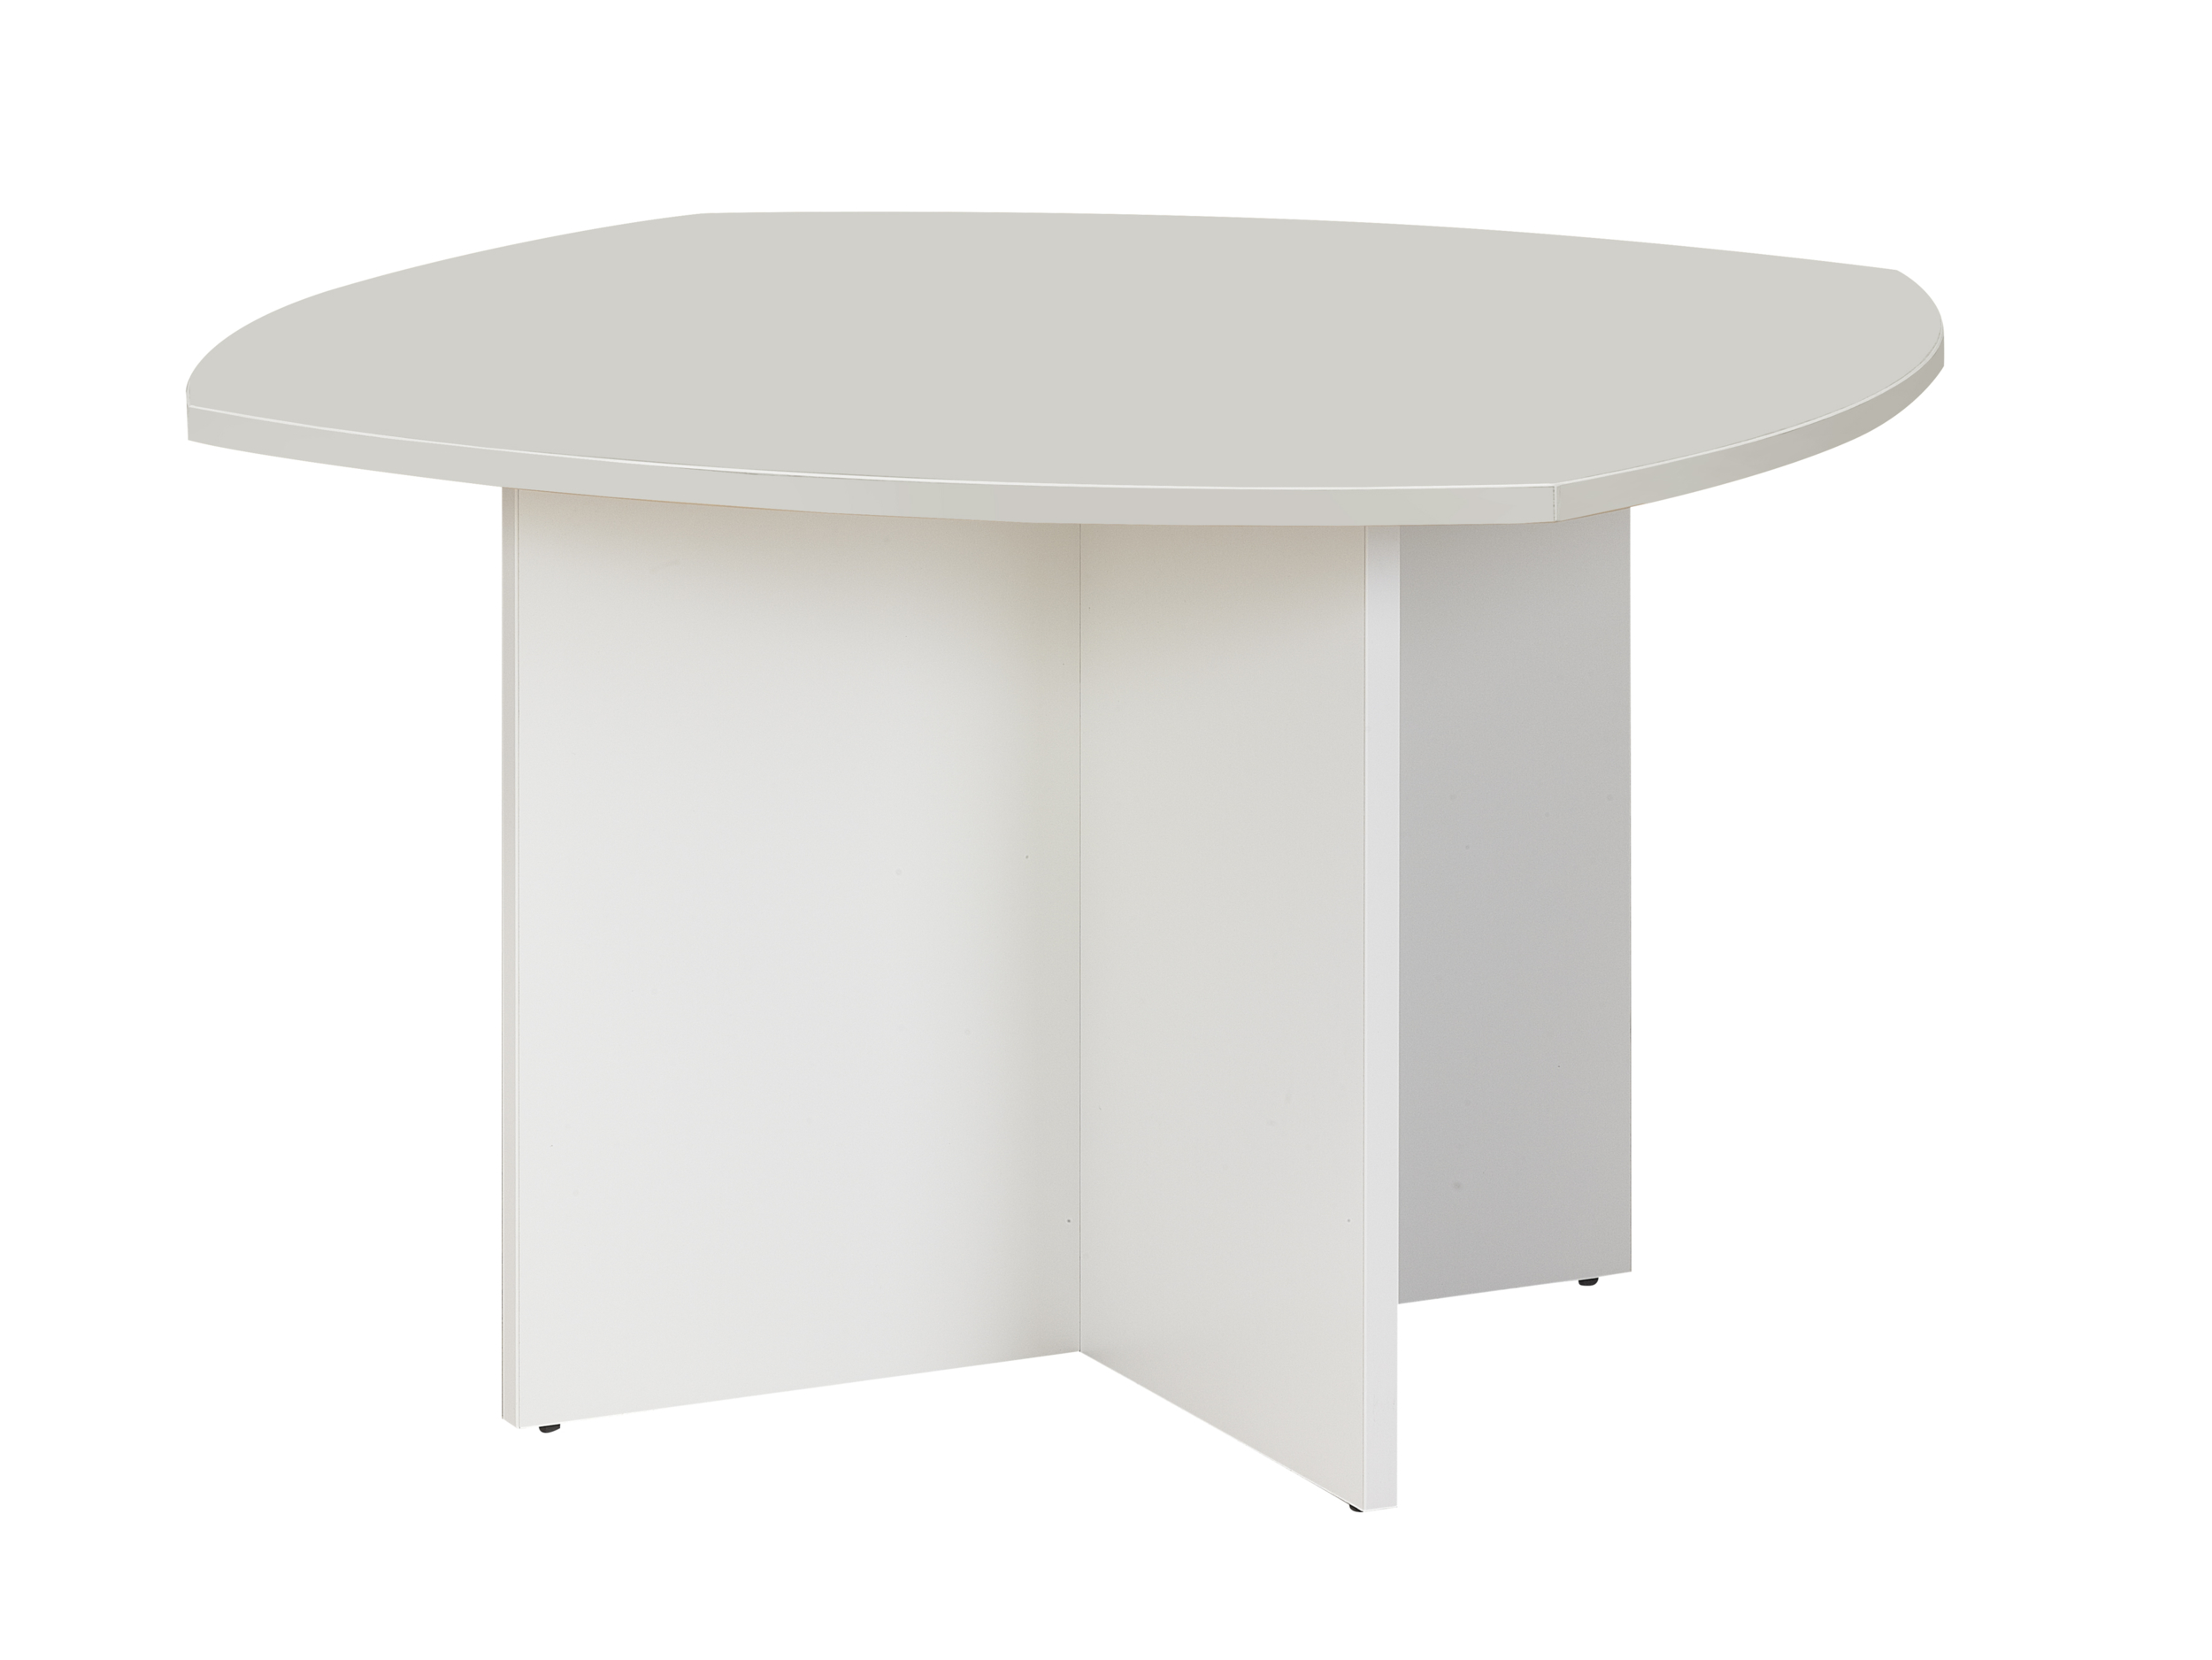 SUNDAY GRIS TABLE RONDE